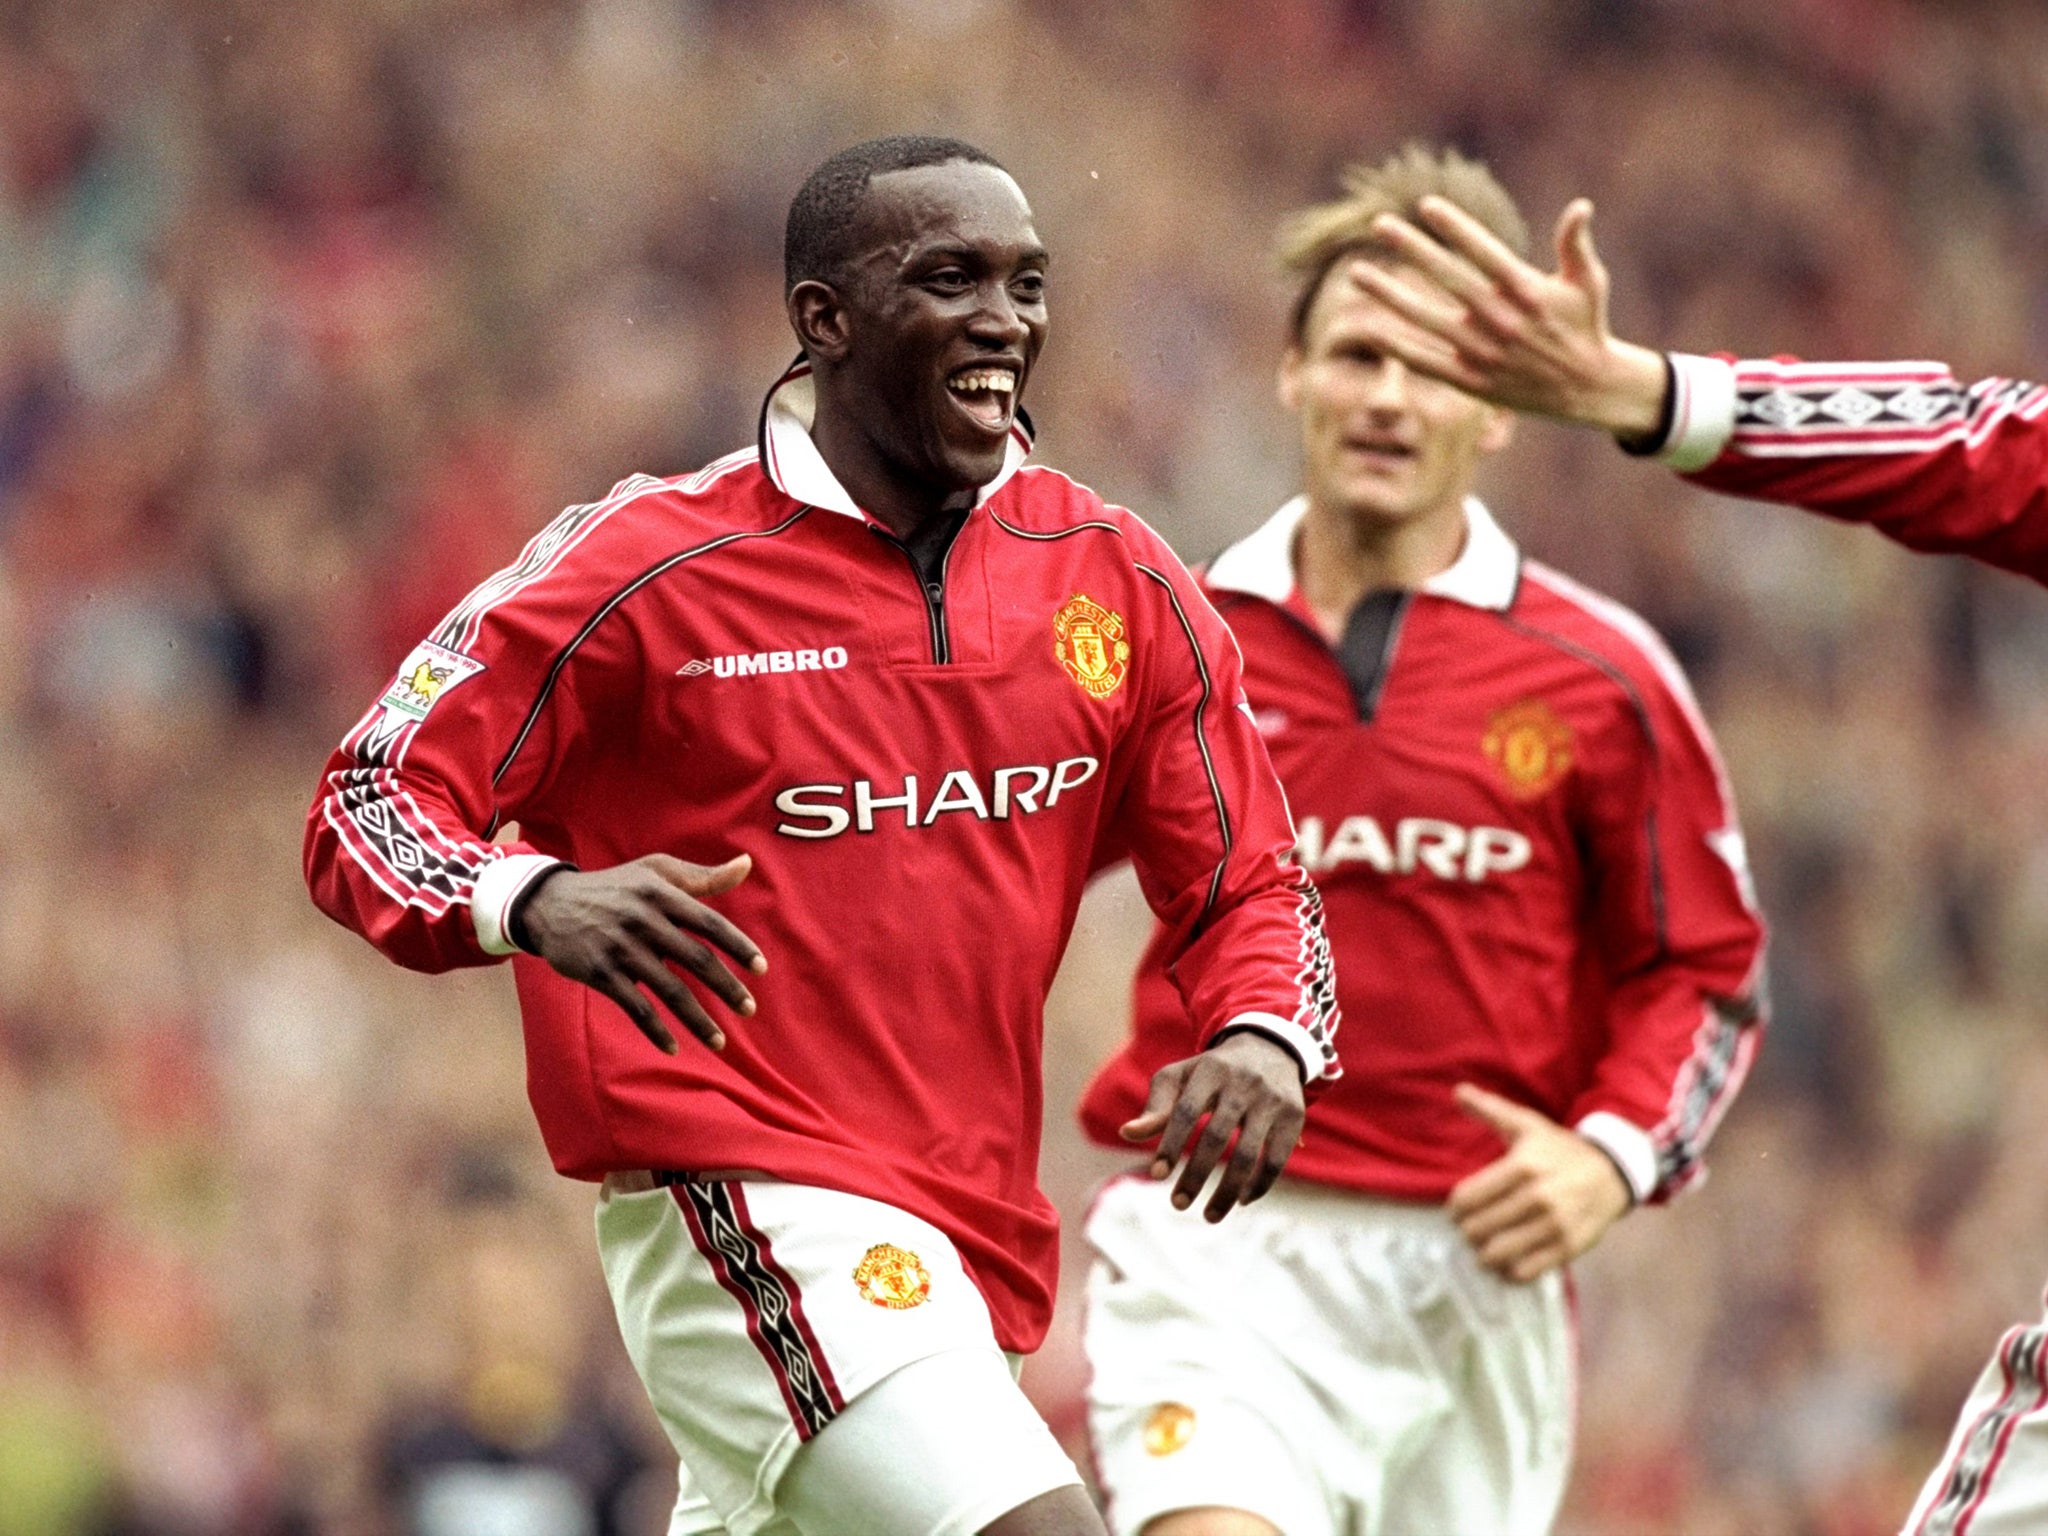 Dwight Yorke scored 65 goals in 147 appearances for Manchester United